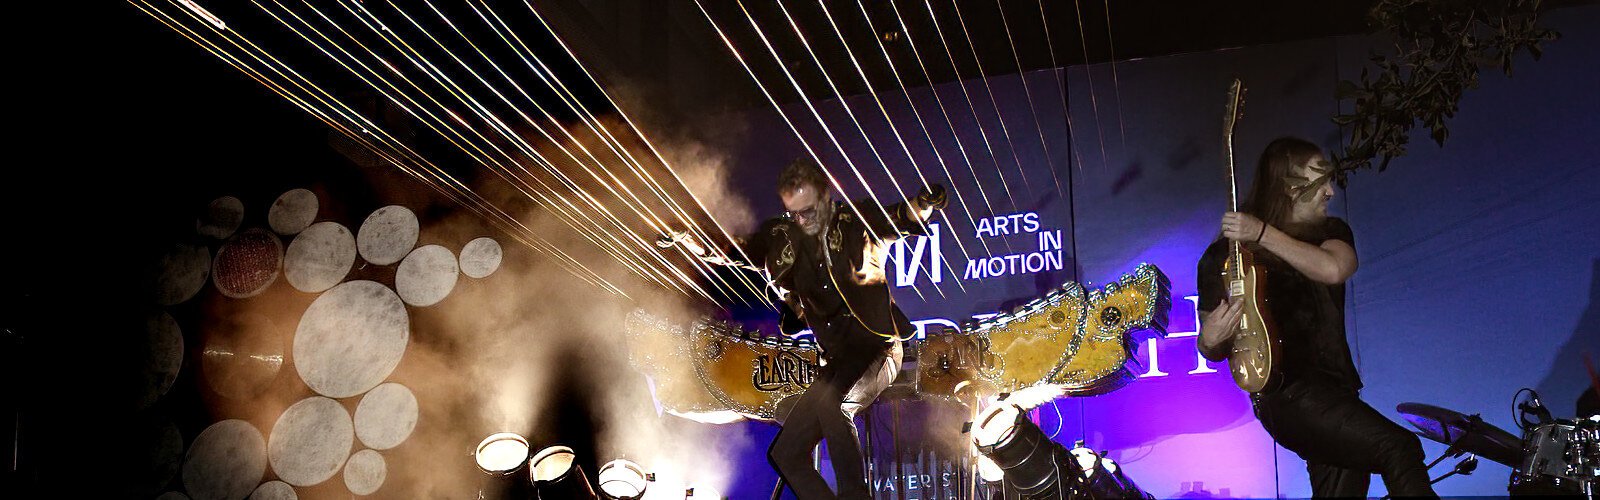 Installation artist, musician and visionary William Close performs at Raybon Plaza with the Earth Harp Collective, creating waves of resonating music during the WATERLICHT experience.